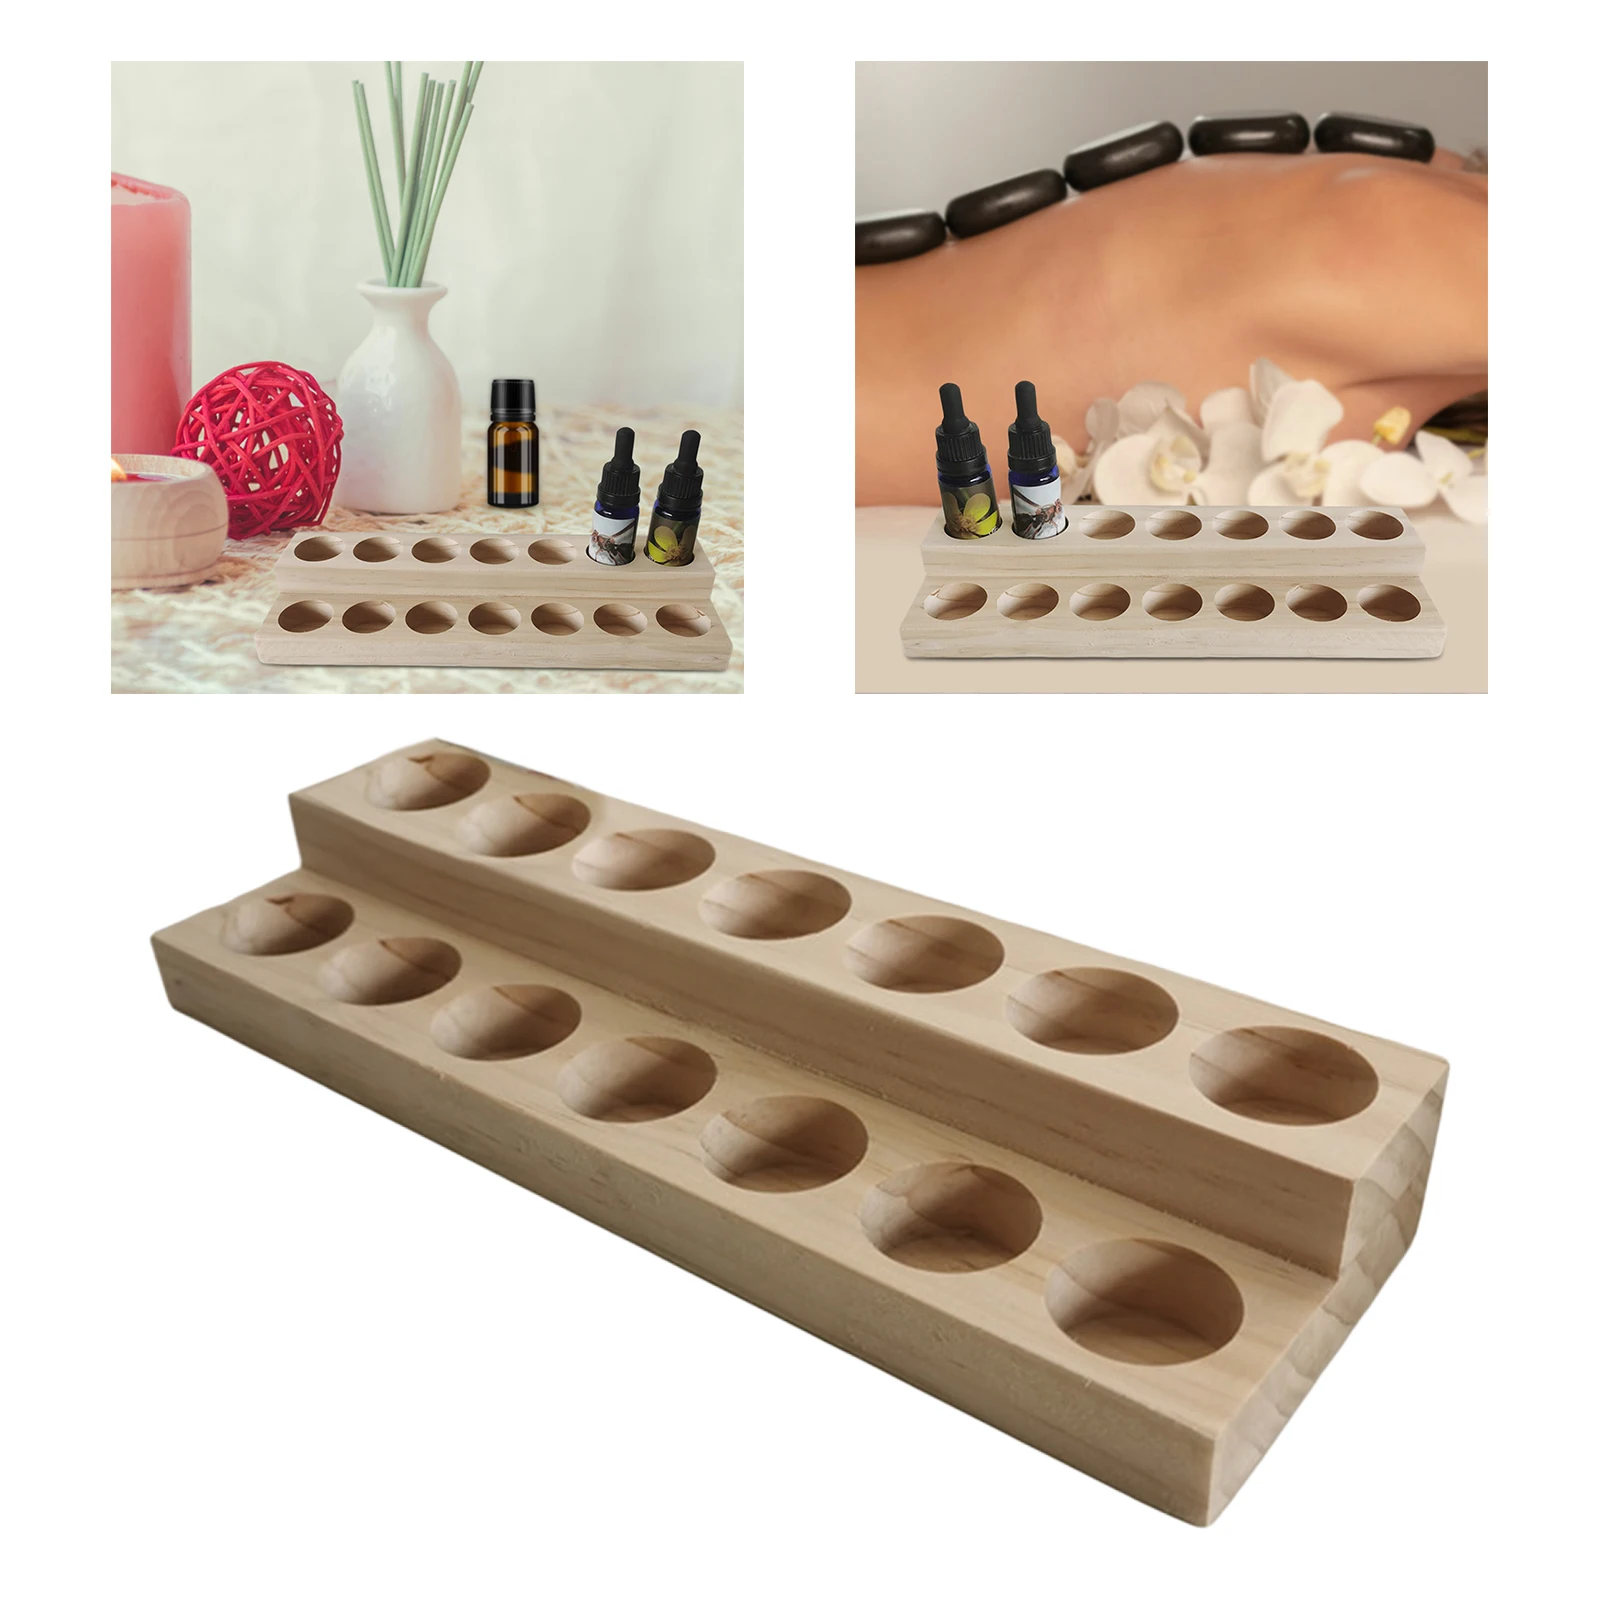 15ml Bottles Essential Oil Storage Rack Tray 2 Layers Case Display Stand Holder for Perfume Ornaments Beauty Salons Tabletop